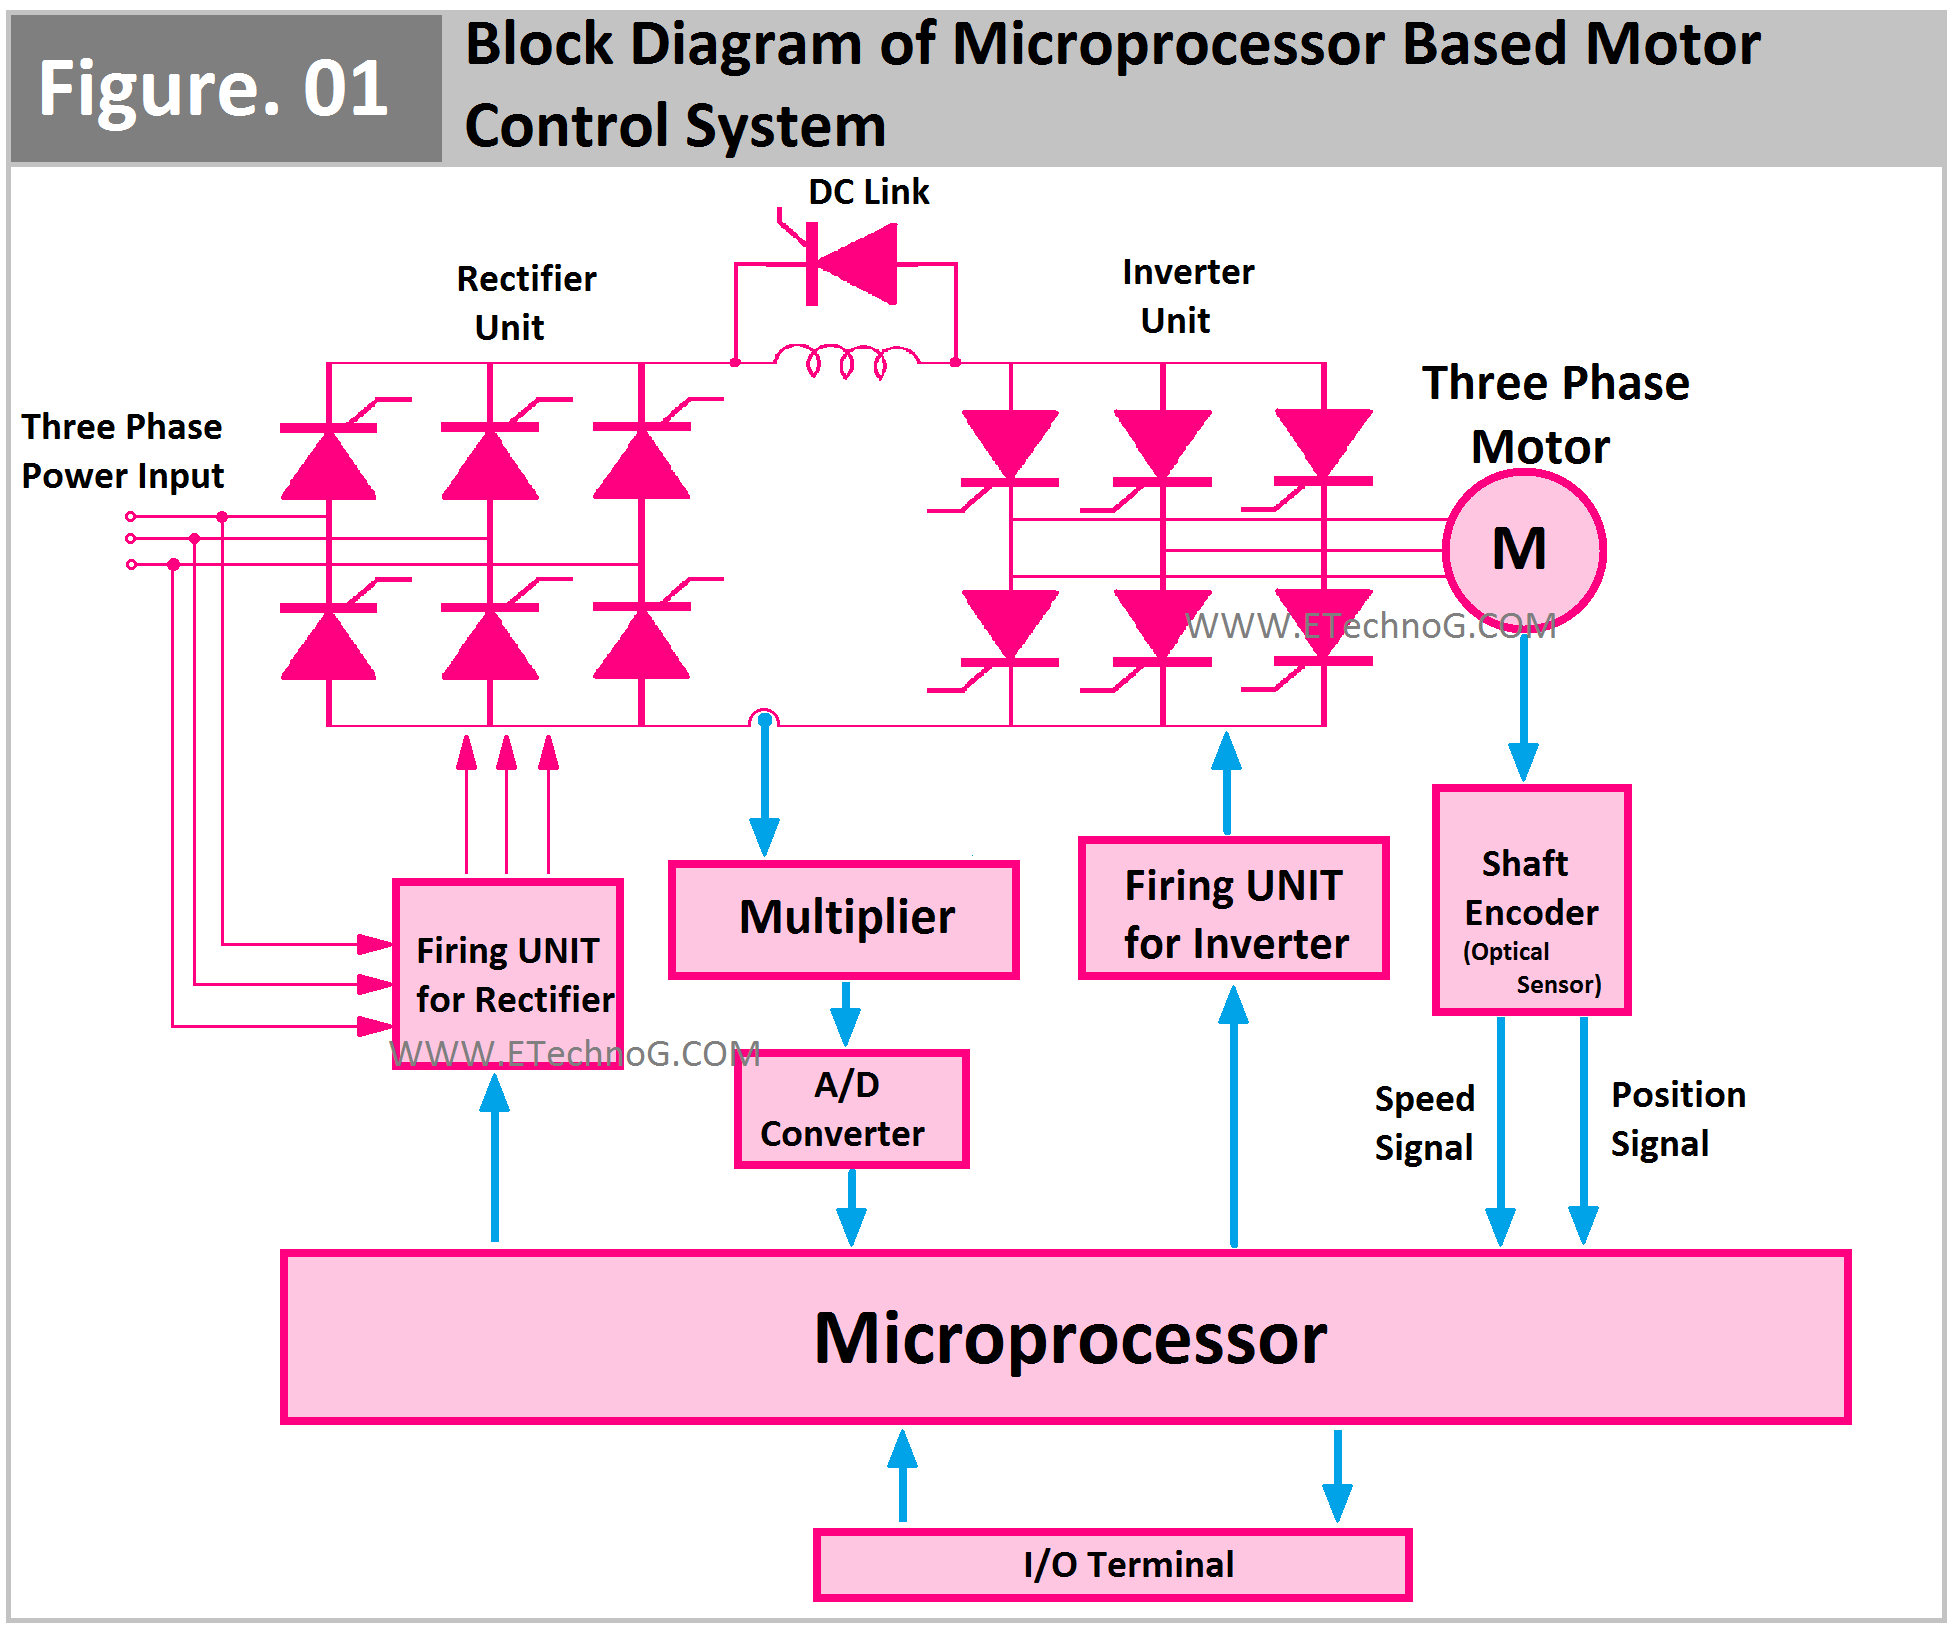 Microprocessor Based Motor Control System Block Diagram, Microprocessor based motor control